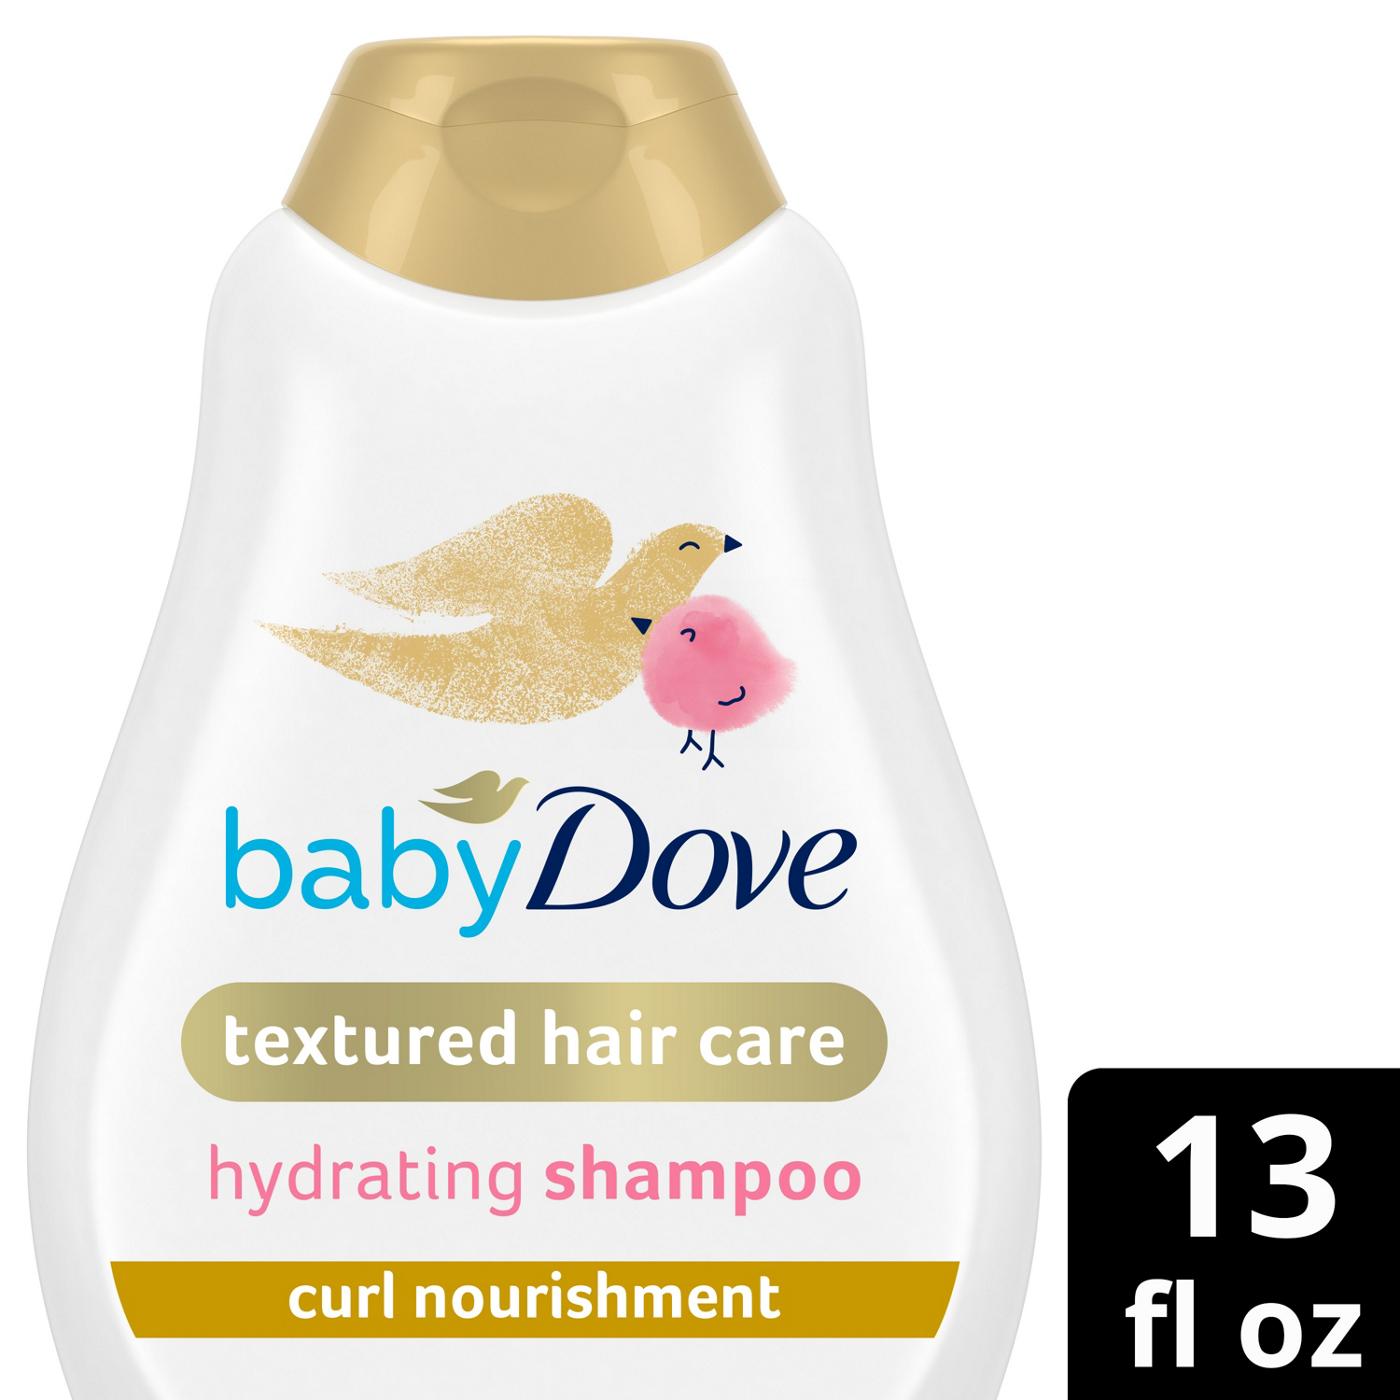 Baby Dove Textured Hair Care Shampoo - Curl Nourishment; image 2 of 7